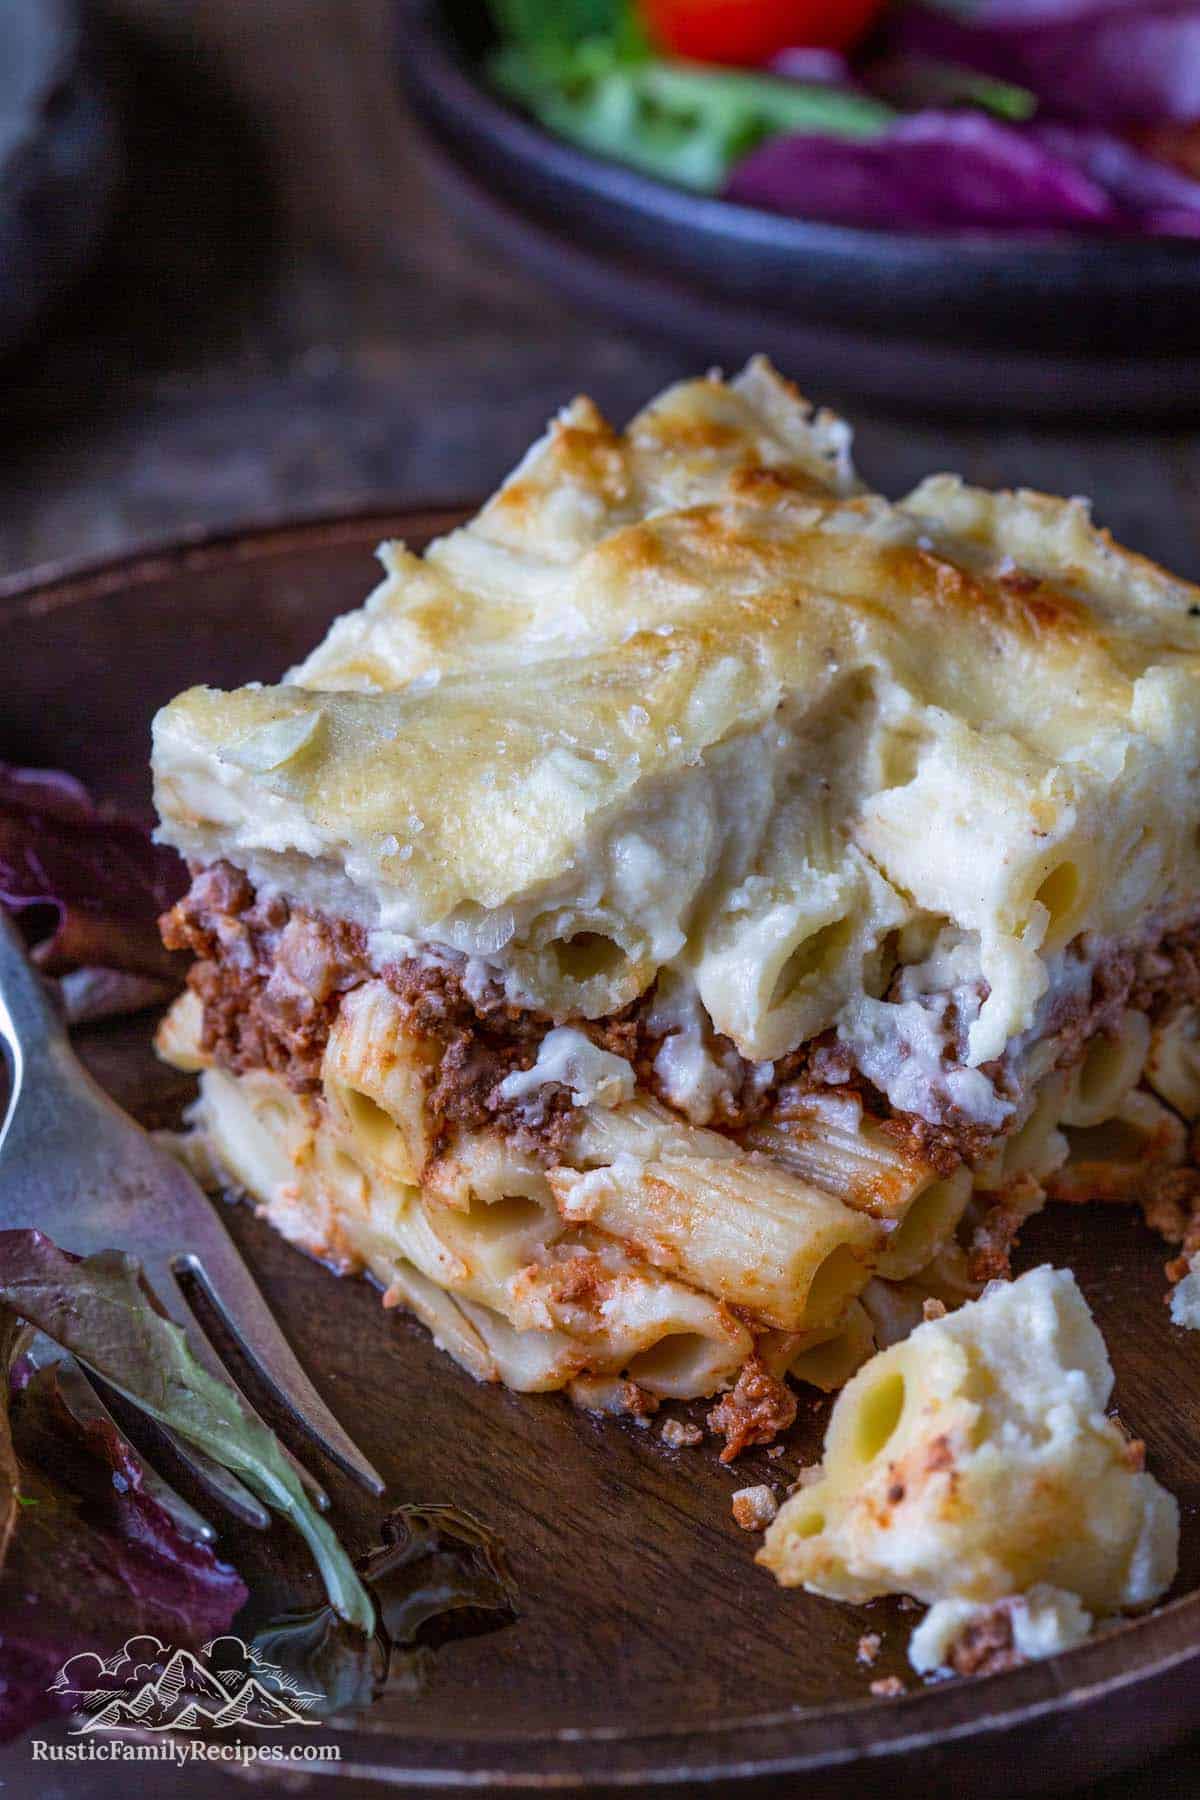 A slice of pastitsio with all its pasta, meat, and béchamel layers, on a plate with a fork.